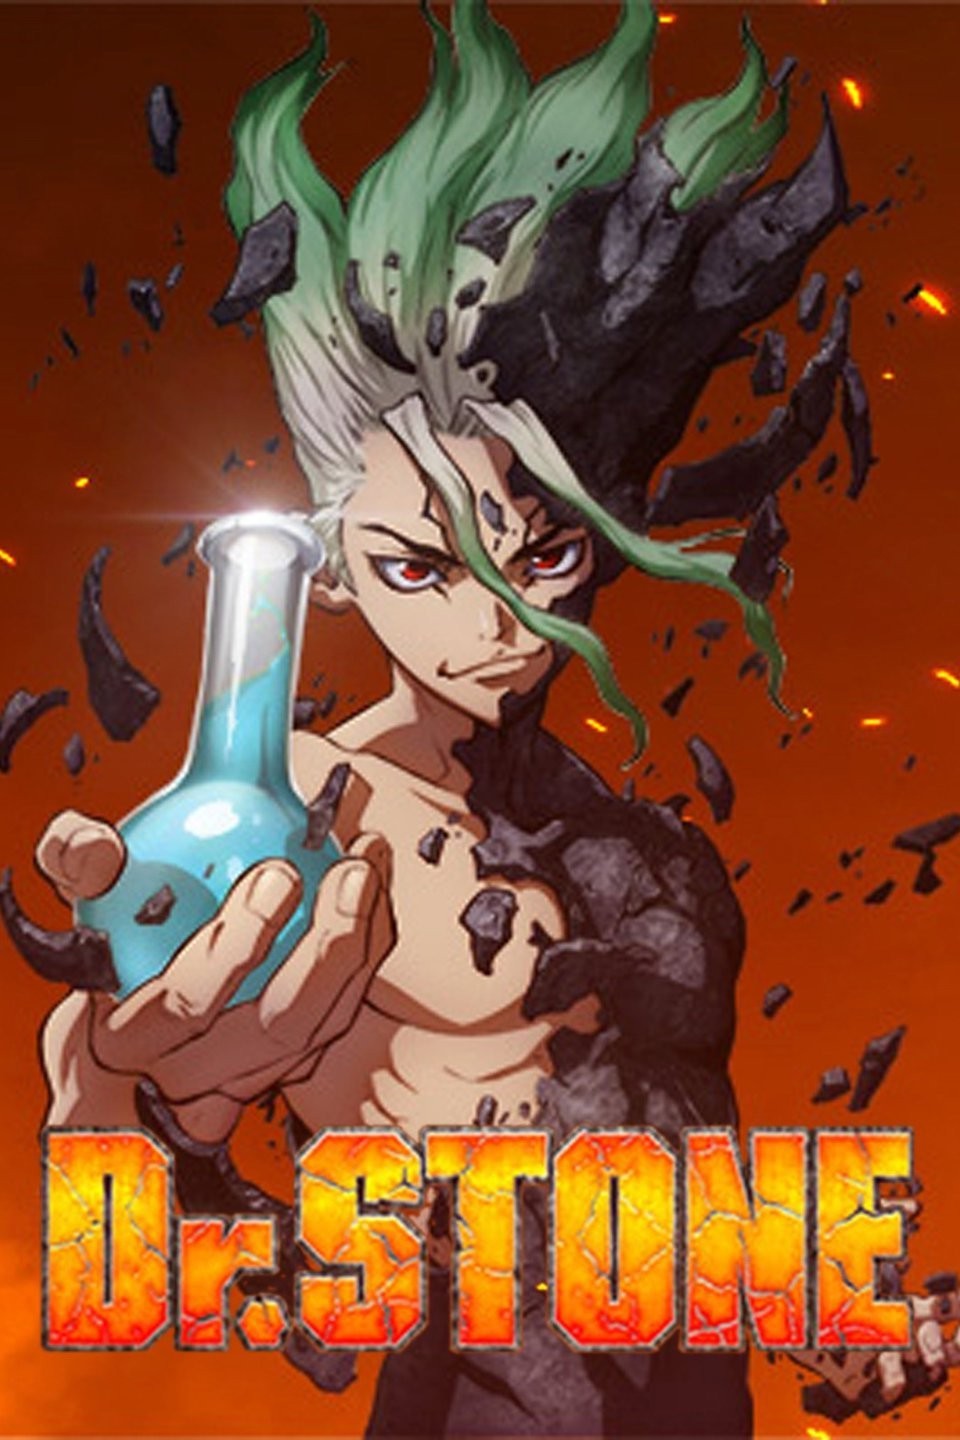 Dr. Stone season 3 finale: When is Dr. Stone: New World coming to an end?